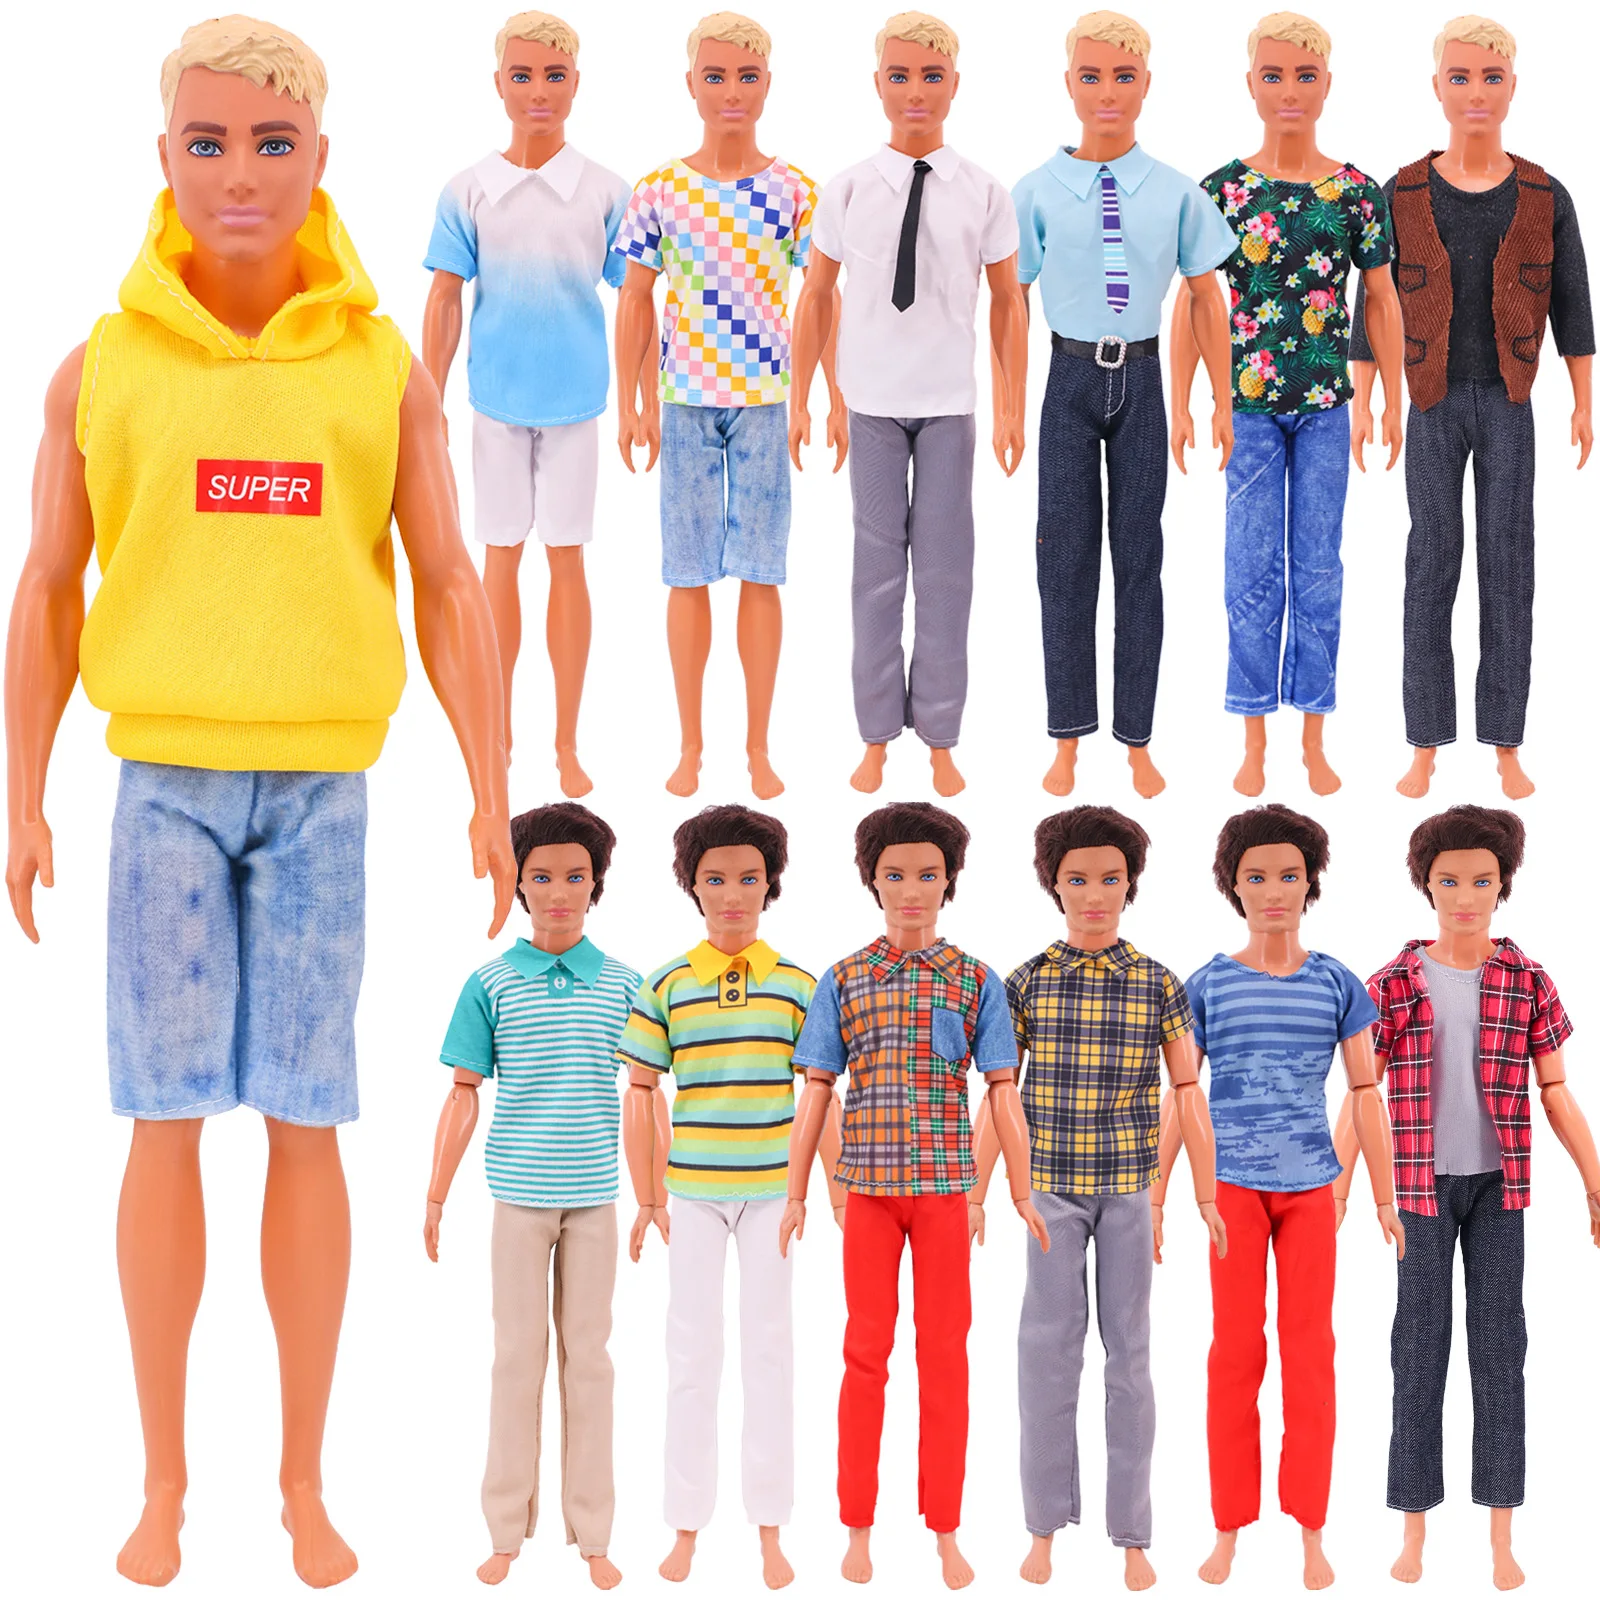 Ken Boy Doll Clothes Handmade Hoodie Shirt Short Sleeve Trousers Fashion Summer New Product For 11.8 Inch Boy Dolls Children Toy adjustable belt for kids children stretch elastic canvas waistband boys girls easy buckles pants trousers strap belts